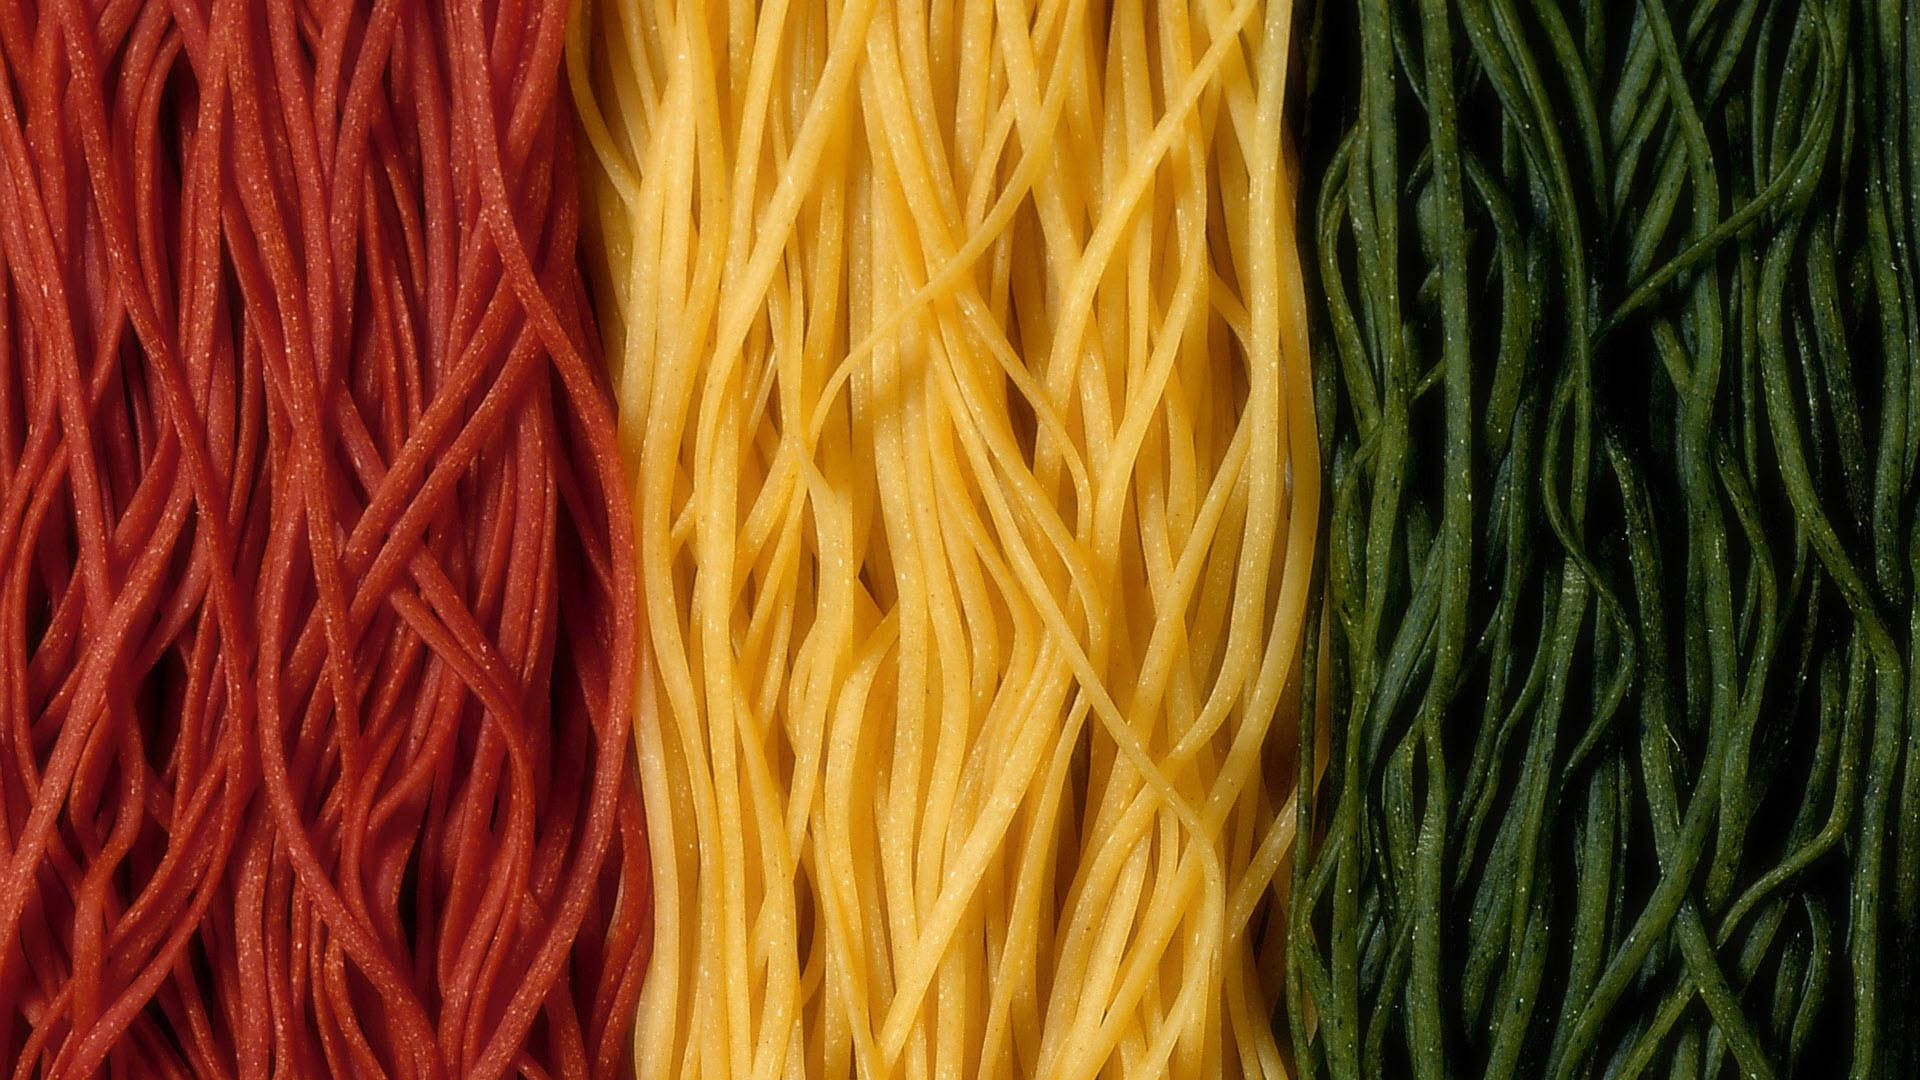 Colored Pasta Background